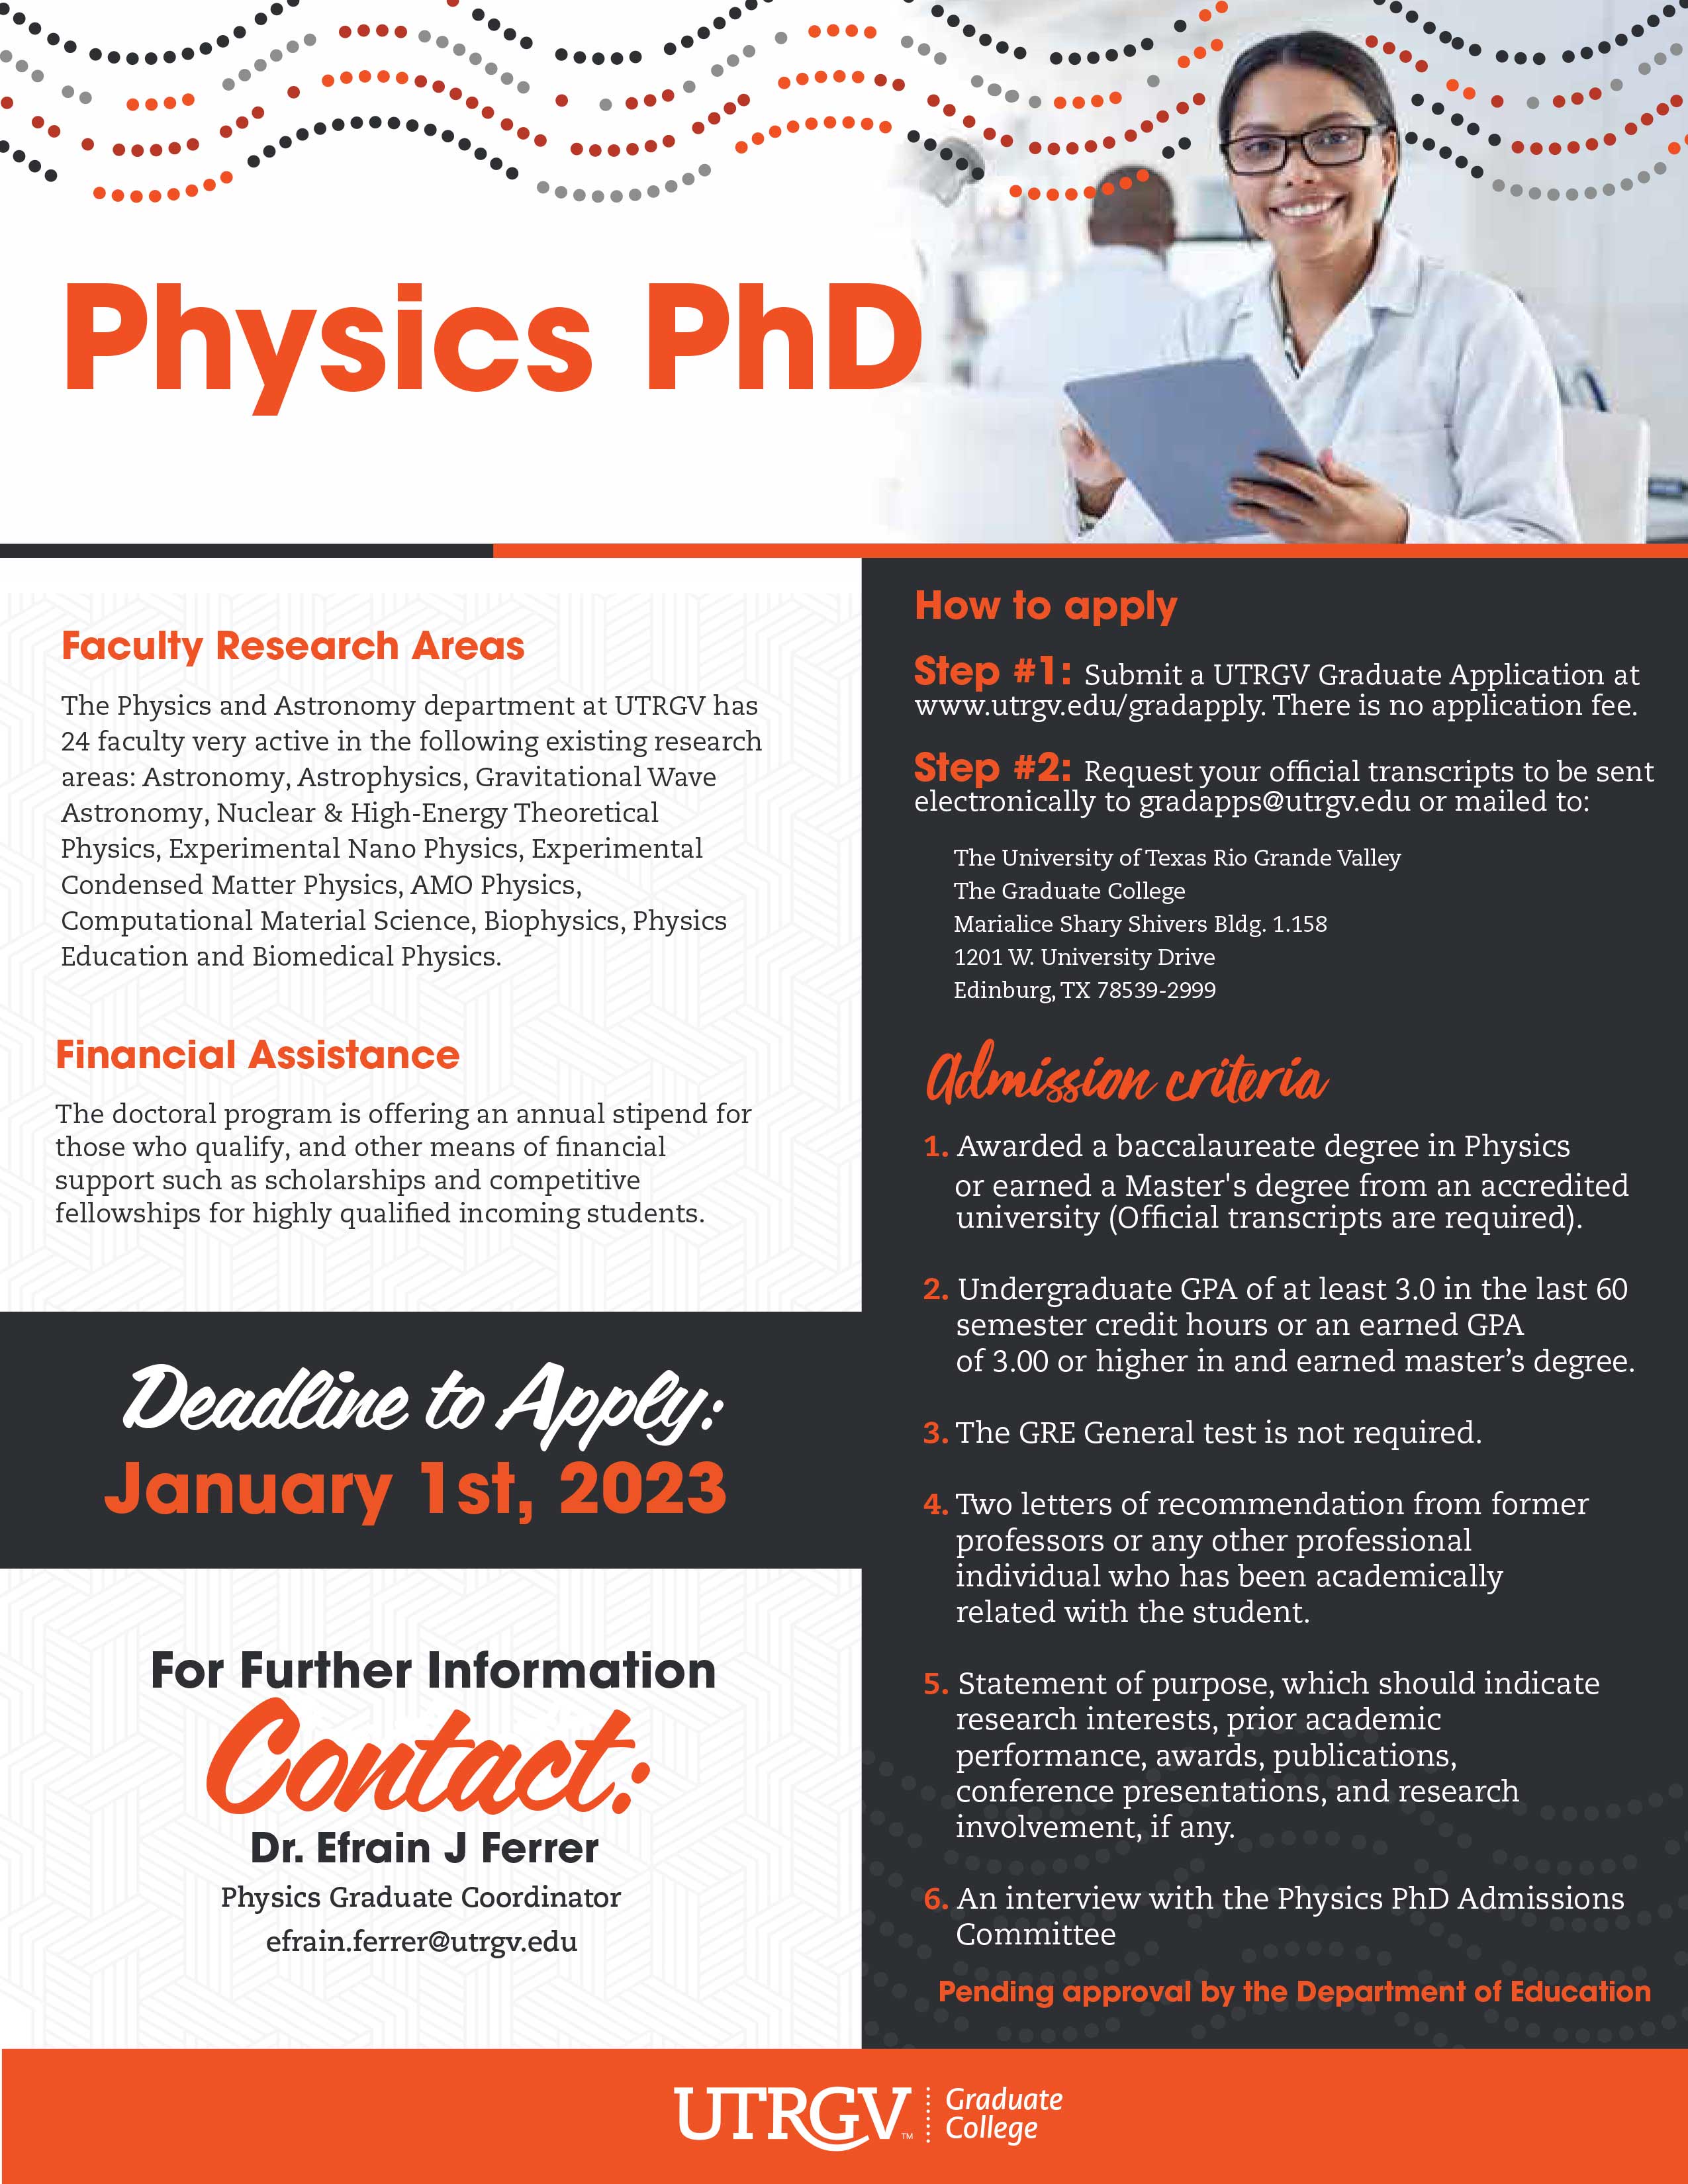 phd in physics through distance education